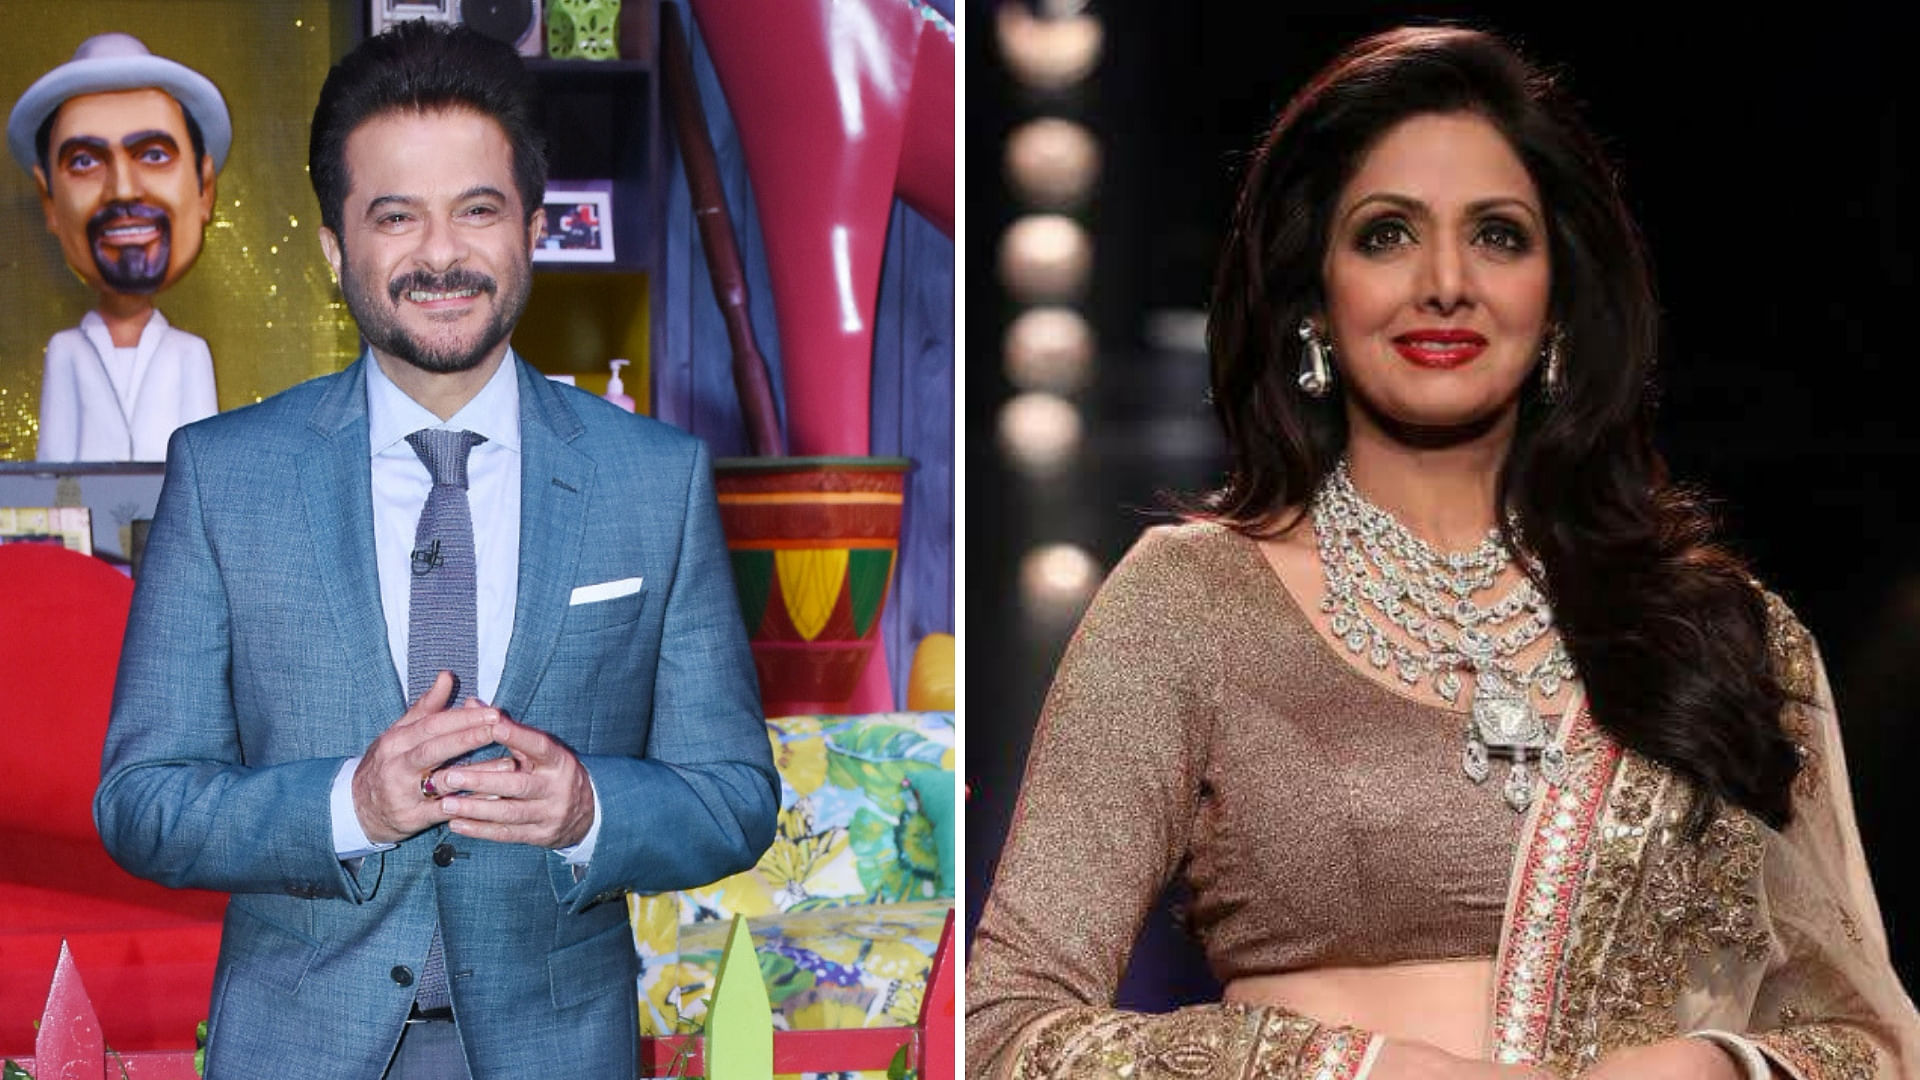 Anil Kapoor co-starred with Sridevi in films like <i>Lamhe</i>.